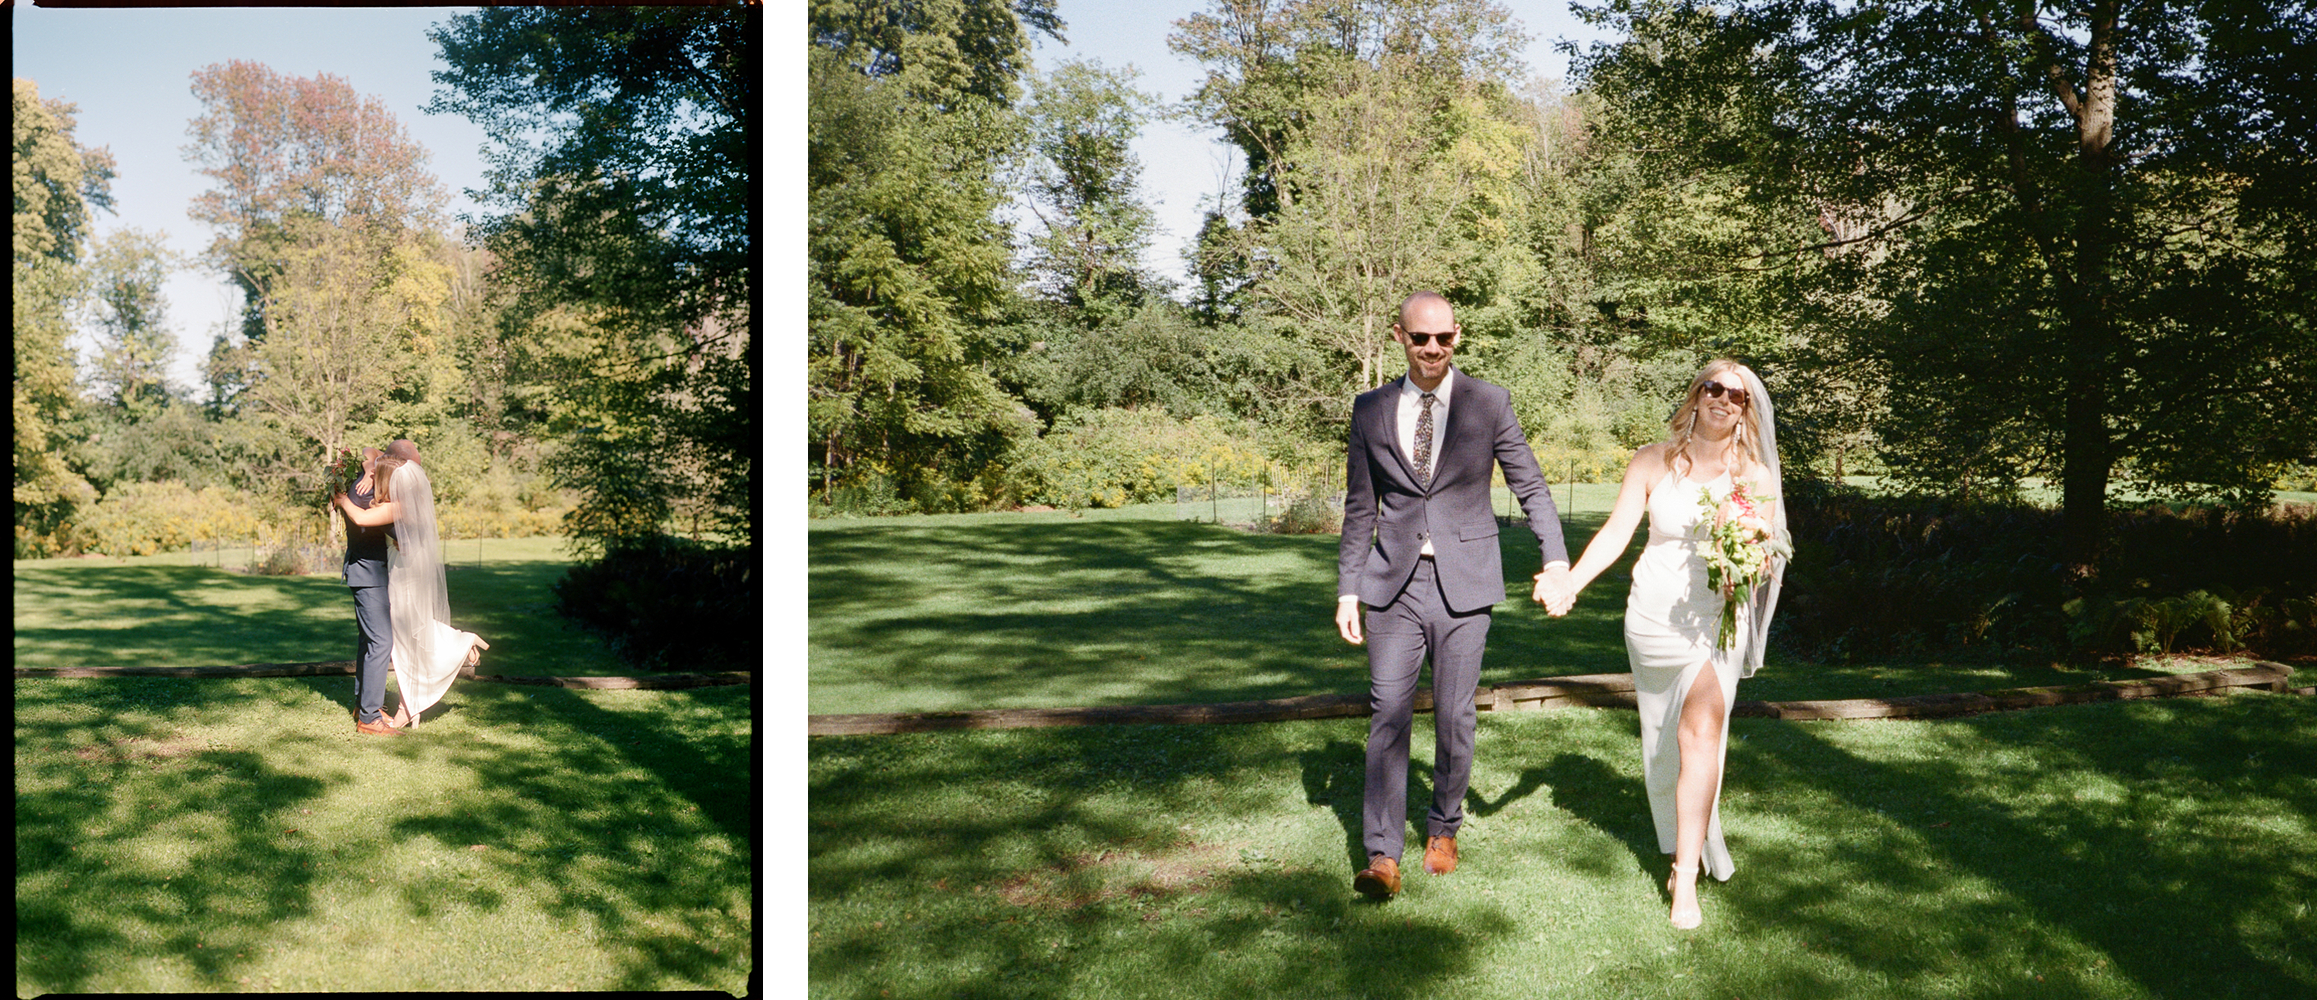 Backyard-Elopement-on-Film-Analog-Pool-Party-45.PNG